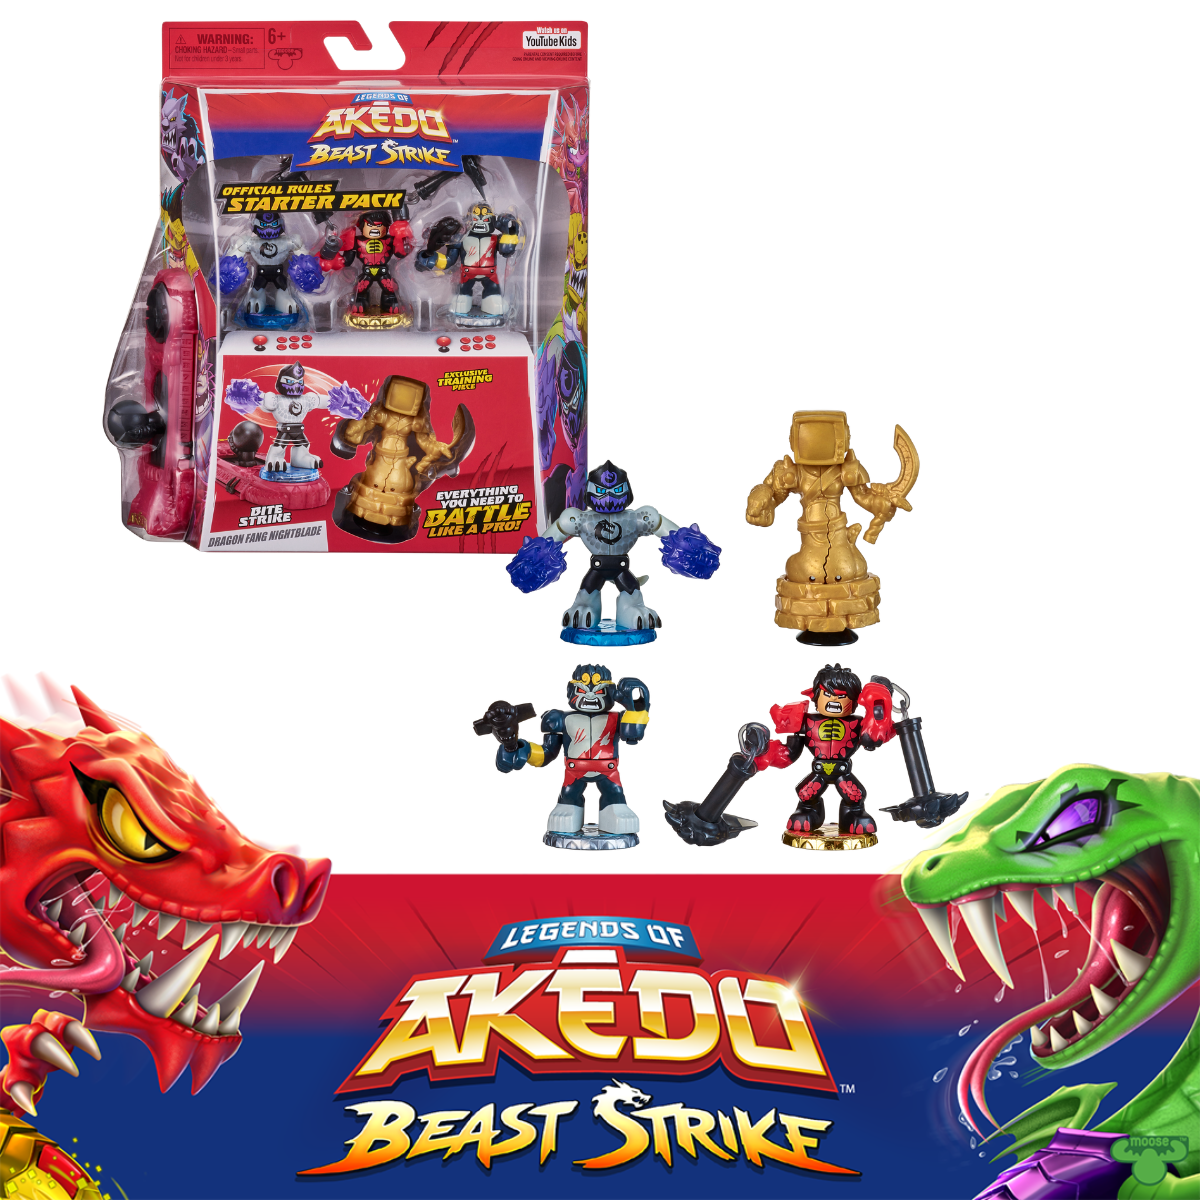 Free: Legends of Akedo Beast Strike - Official Rules Claw Strike